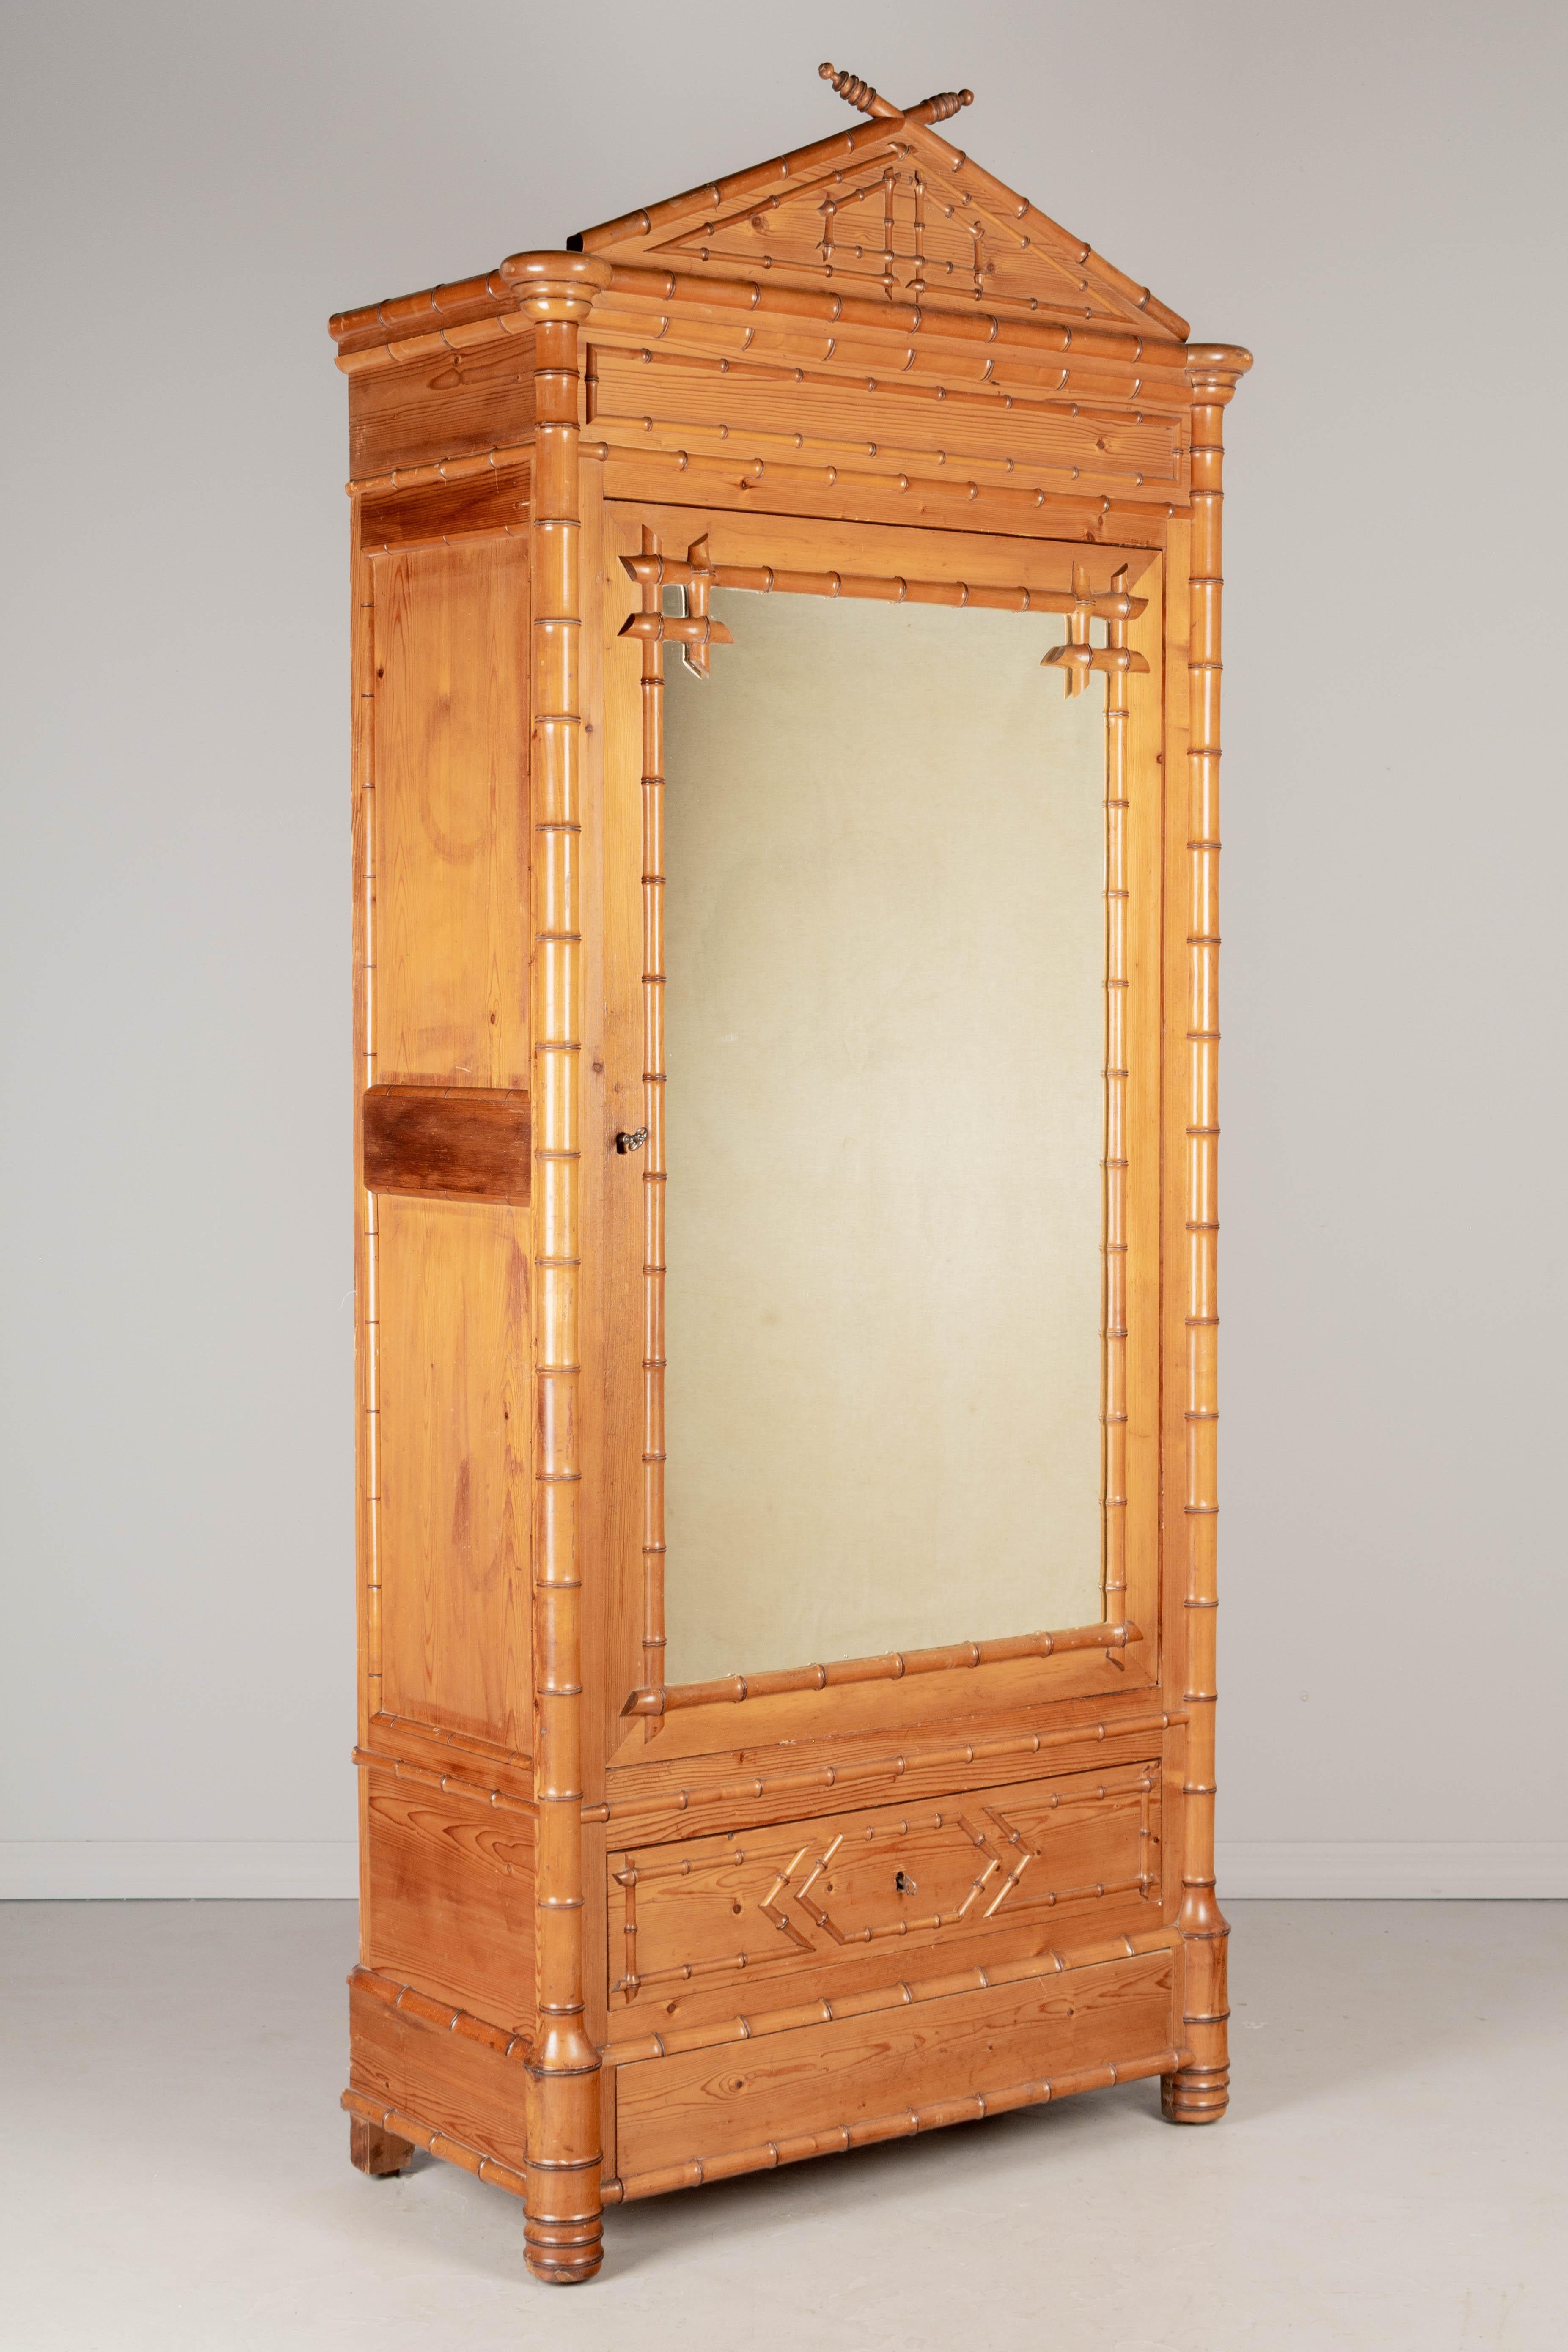 A 19th century French faux bamboo armoire, or wardrobe, made of pine with solid cherry faux bamboo details and oak back. Mirrored door opens to an interior with three adjustable shelves. Two dovetailed drawers below the door. Working locks and two